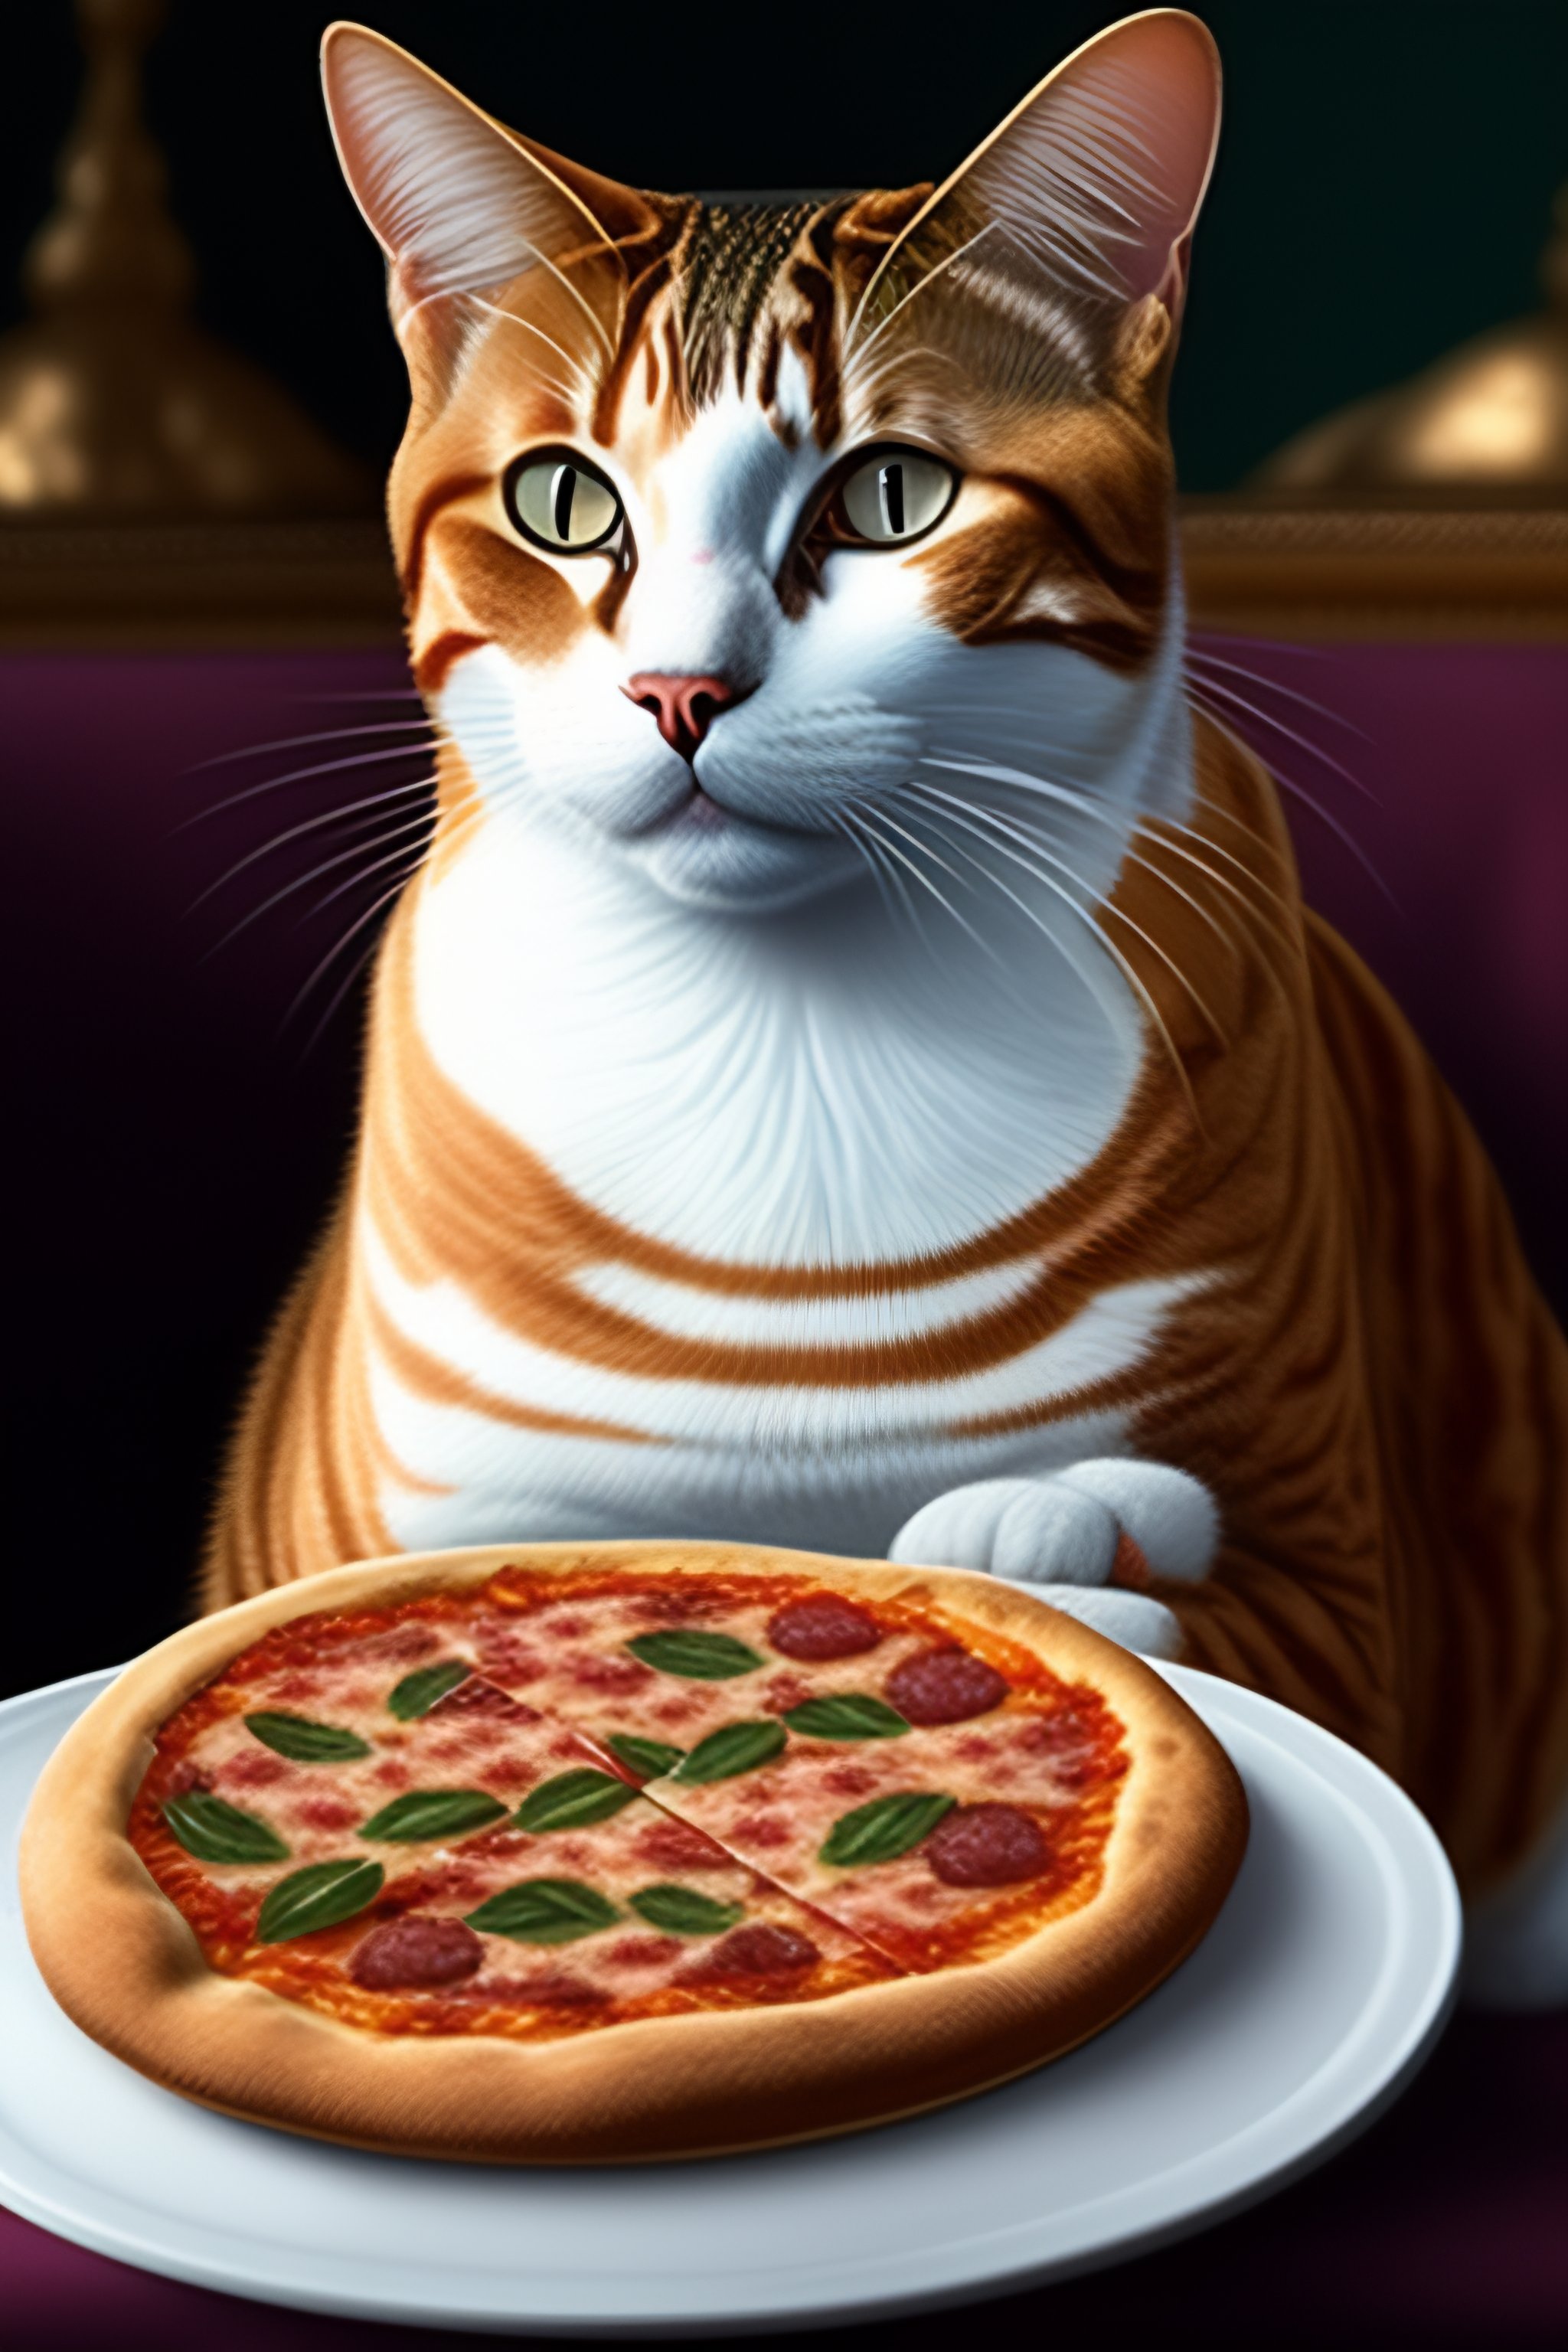 cat eating pizza